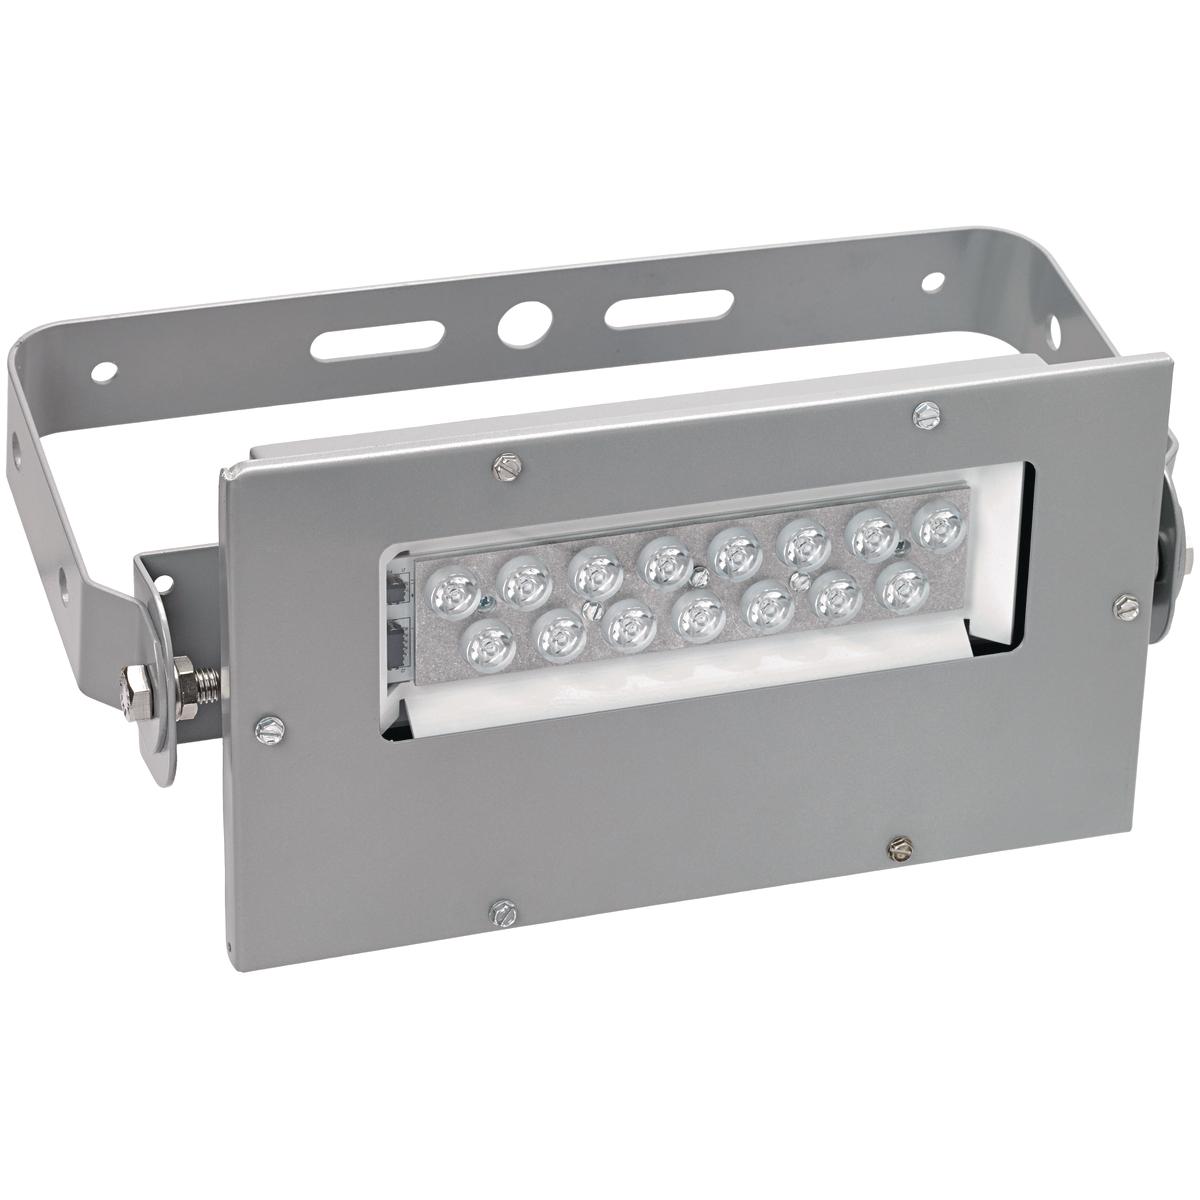 Hubbell KFLC1534 The KFLC Series compact LED floodlights are designed with a copper-free aluminum housing and painted with a powder epoxy finish for superior corrosion resistance in harsh and hazardous environments. Killark LED floodlights provide a crisp white light that